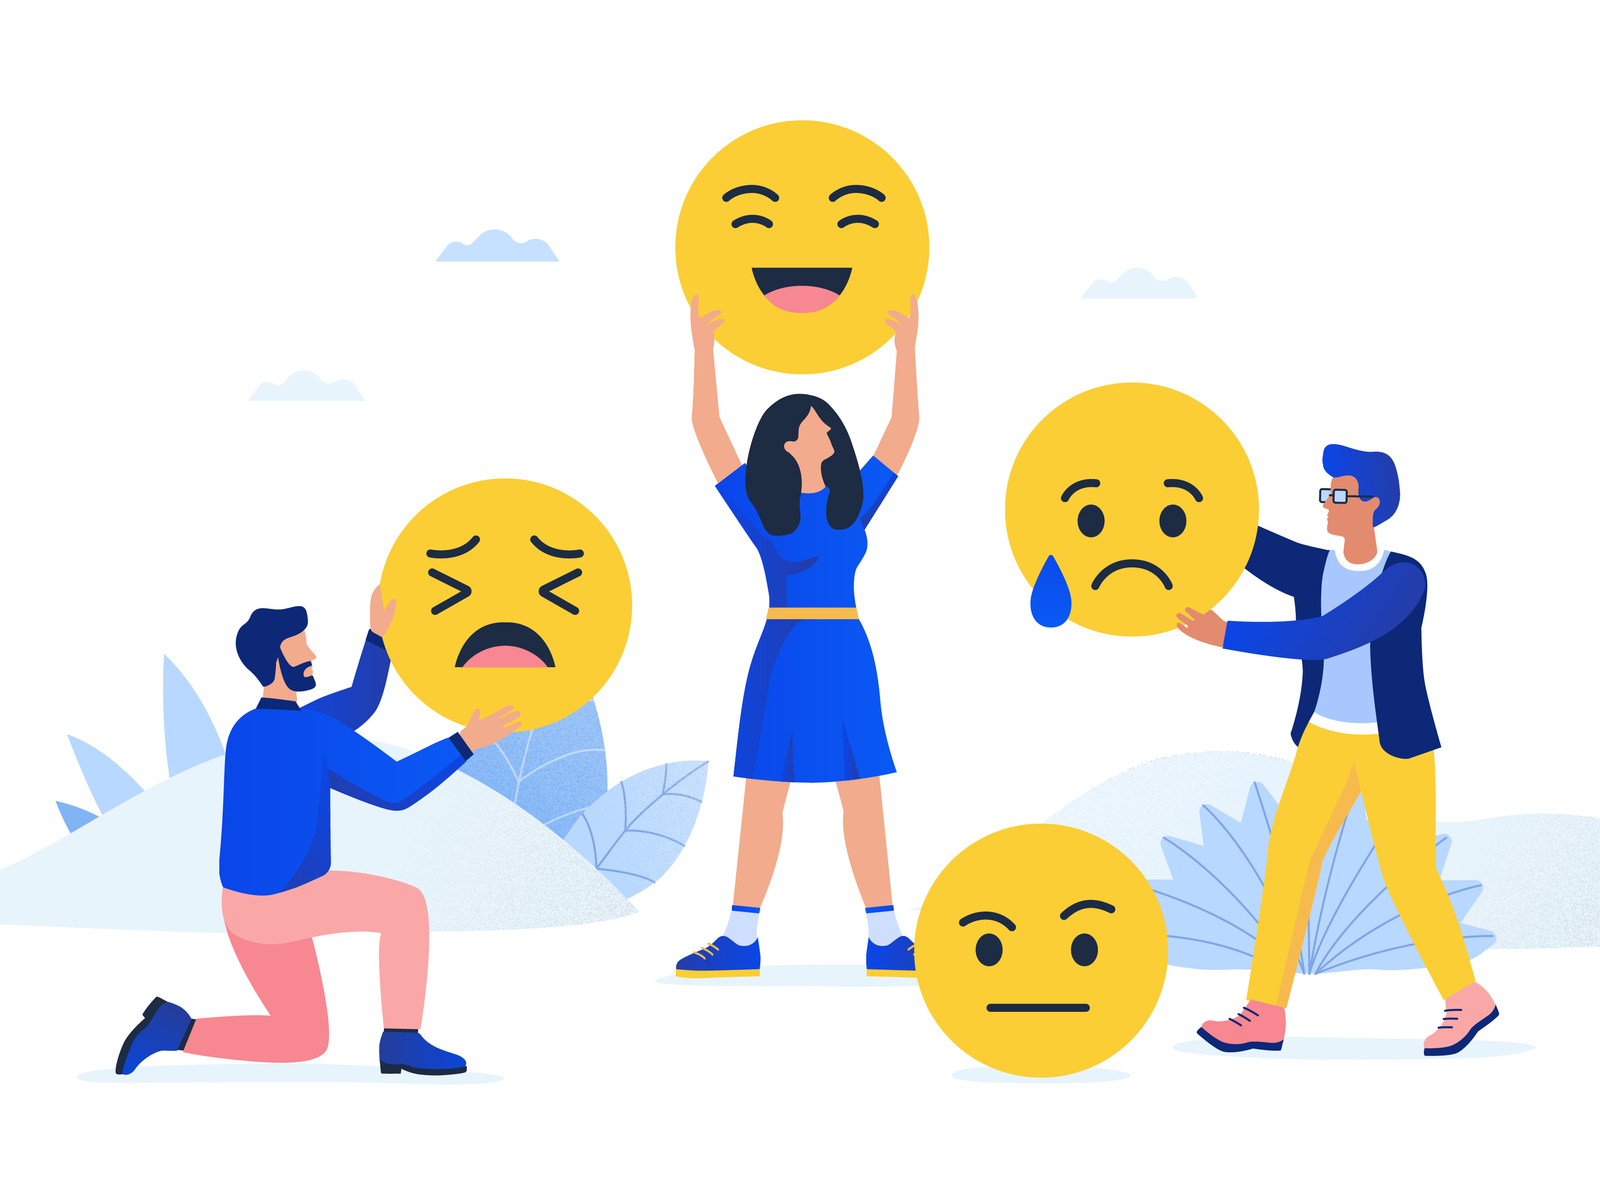 Emotions by Polina Okean on Dribbble